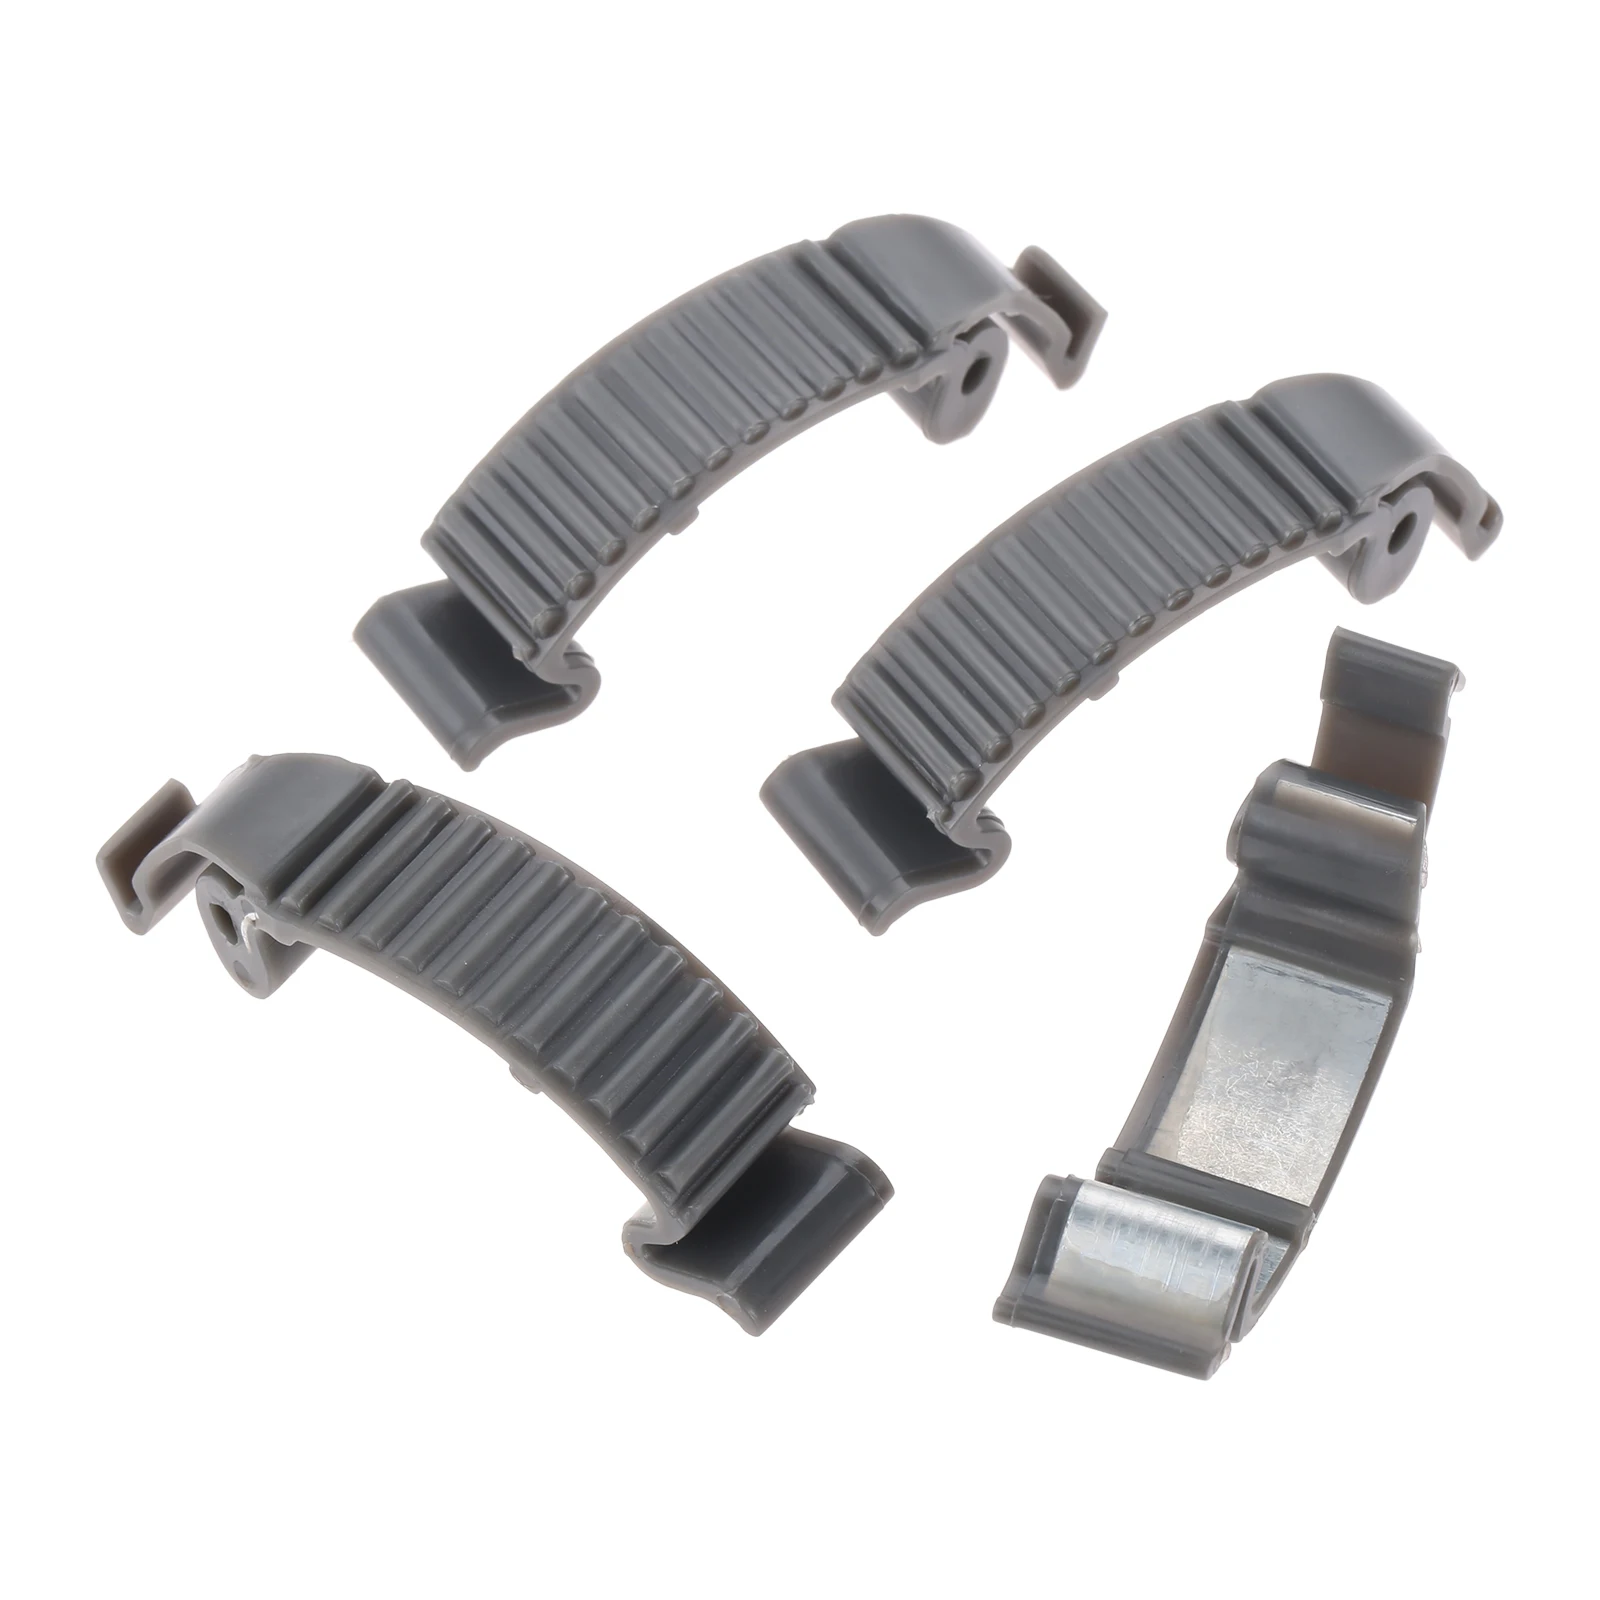 

4pcs Top Engine Cover Buckle Snap Clip for Husqvarna 346 351 353 357 359 435 435 440 445 450 450 570 575 576 Chainsaw 503894701